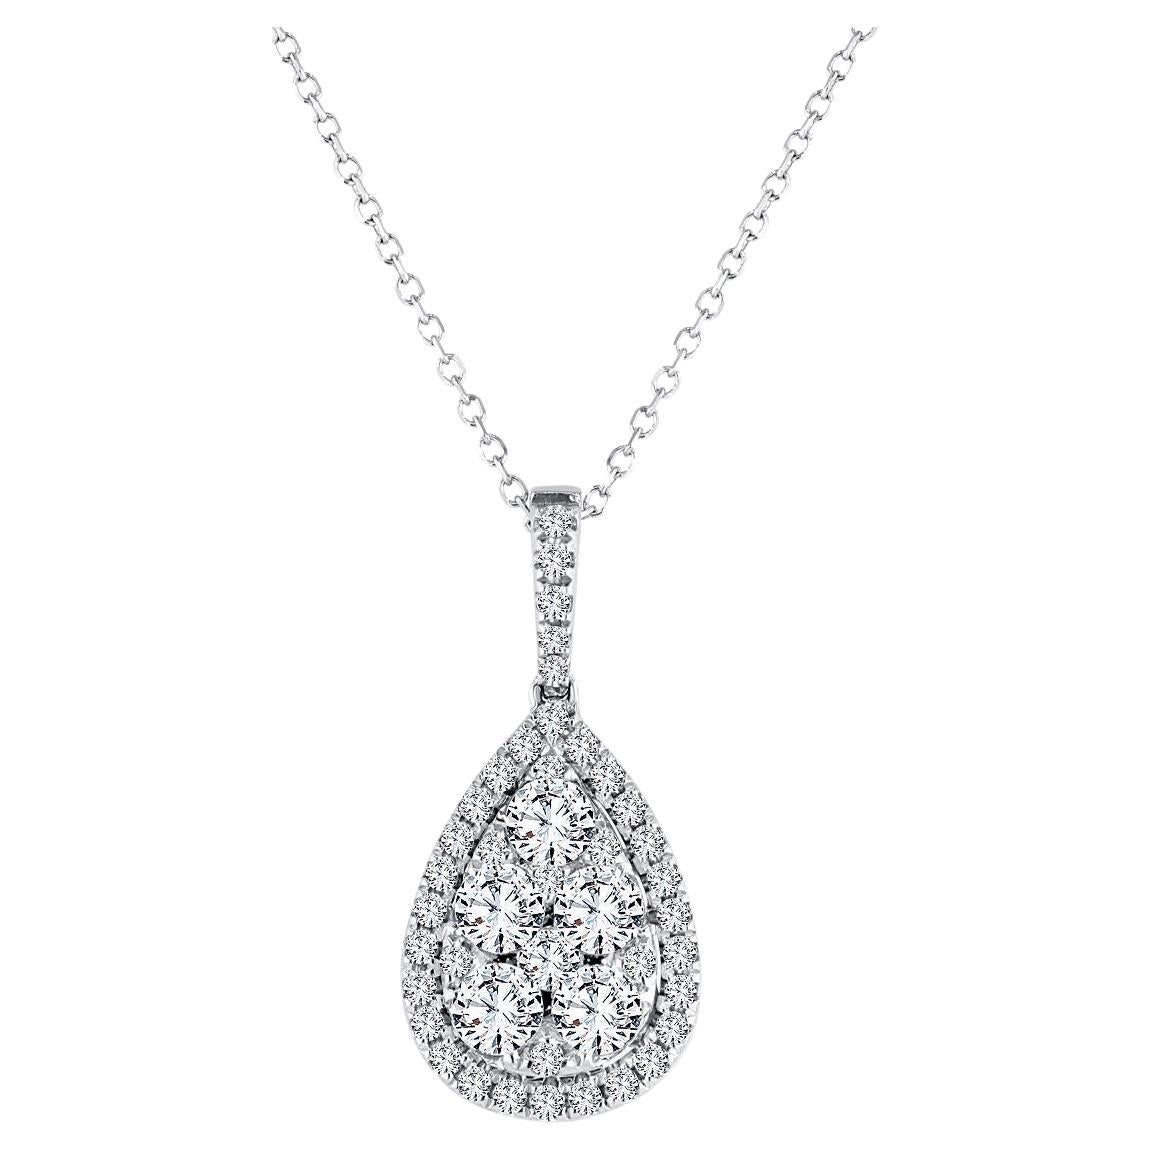 0.76 Carat Total Diamond Weight Pear Illusion Pendant in 14k White Gold ref2331 For Sale